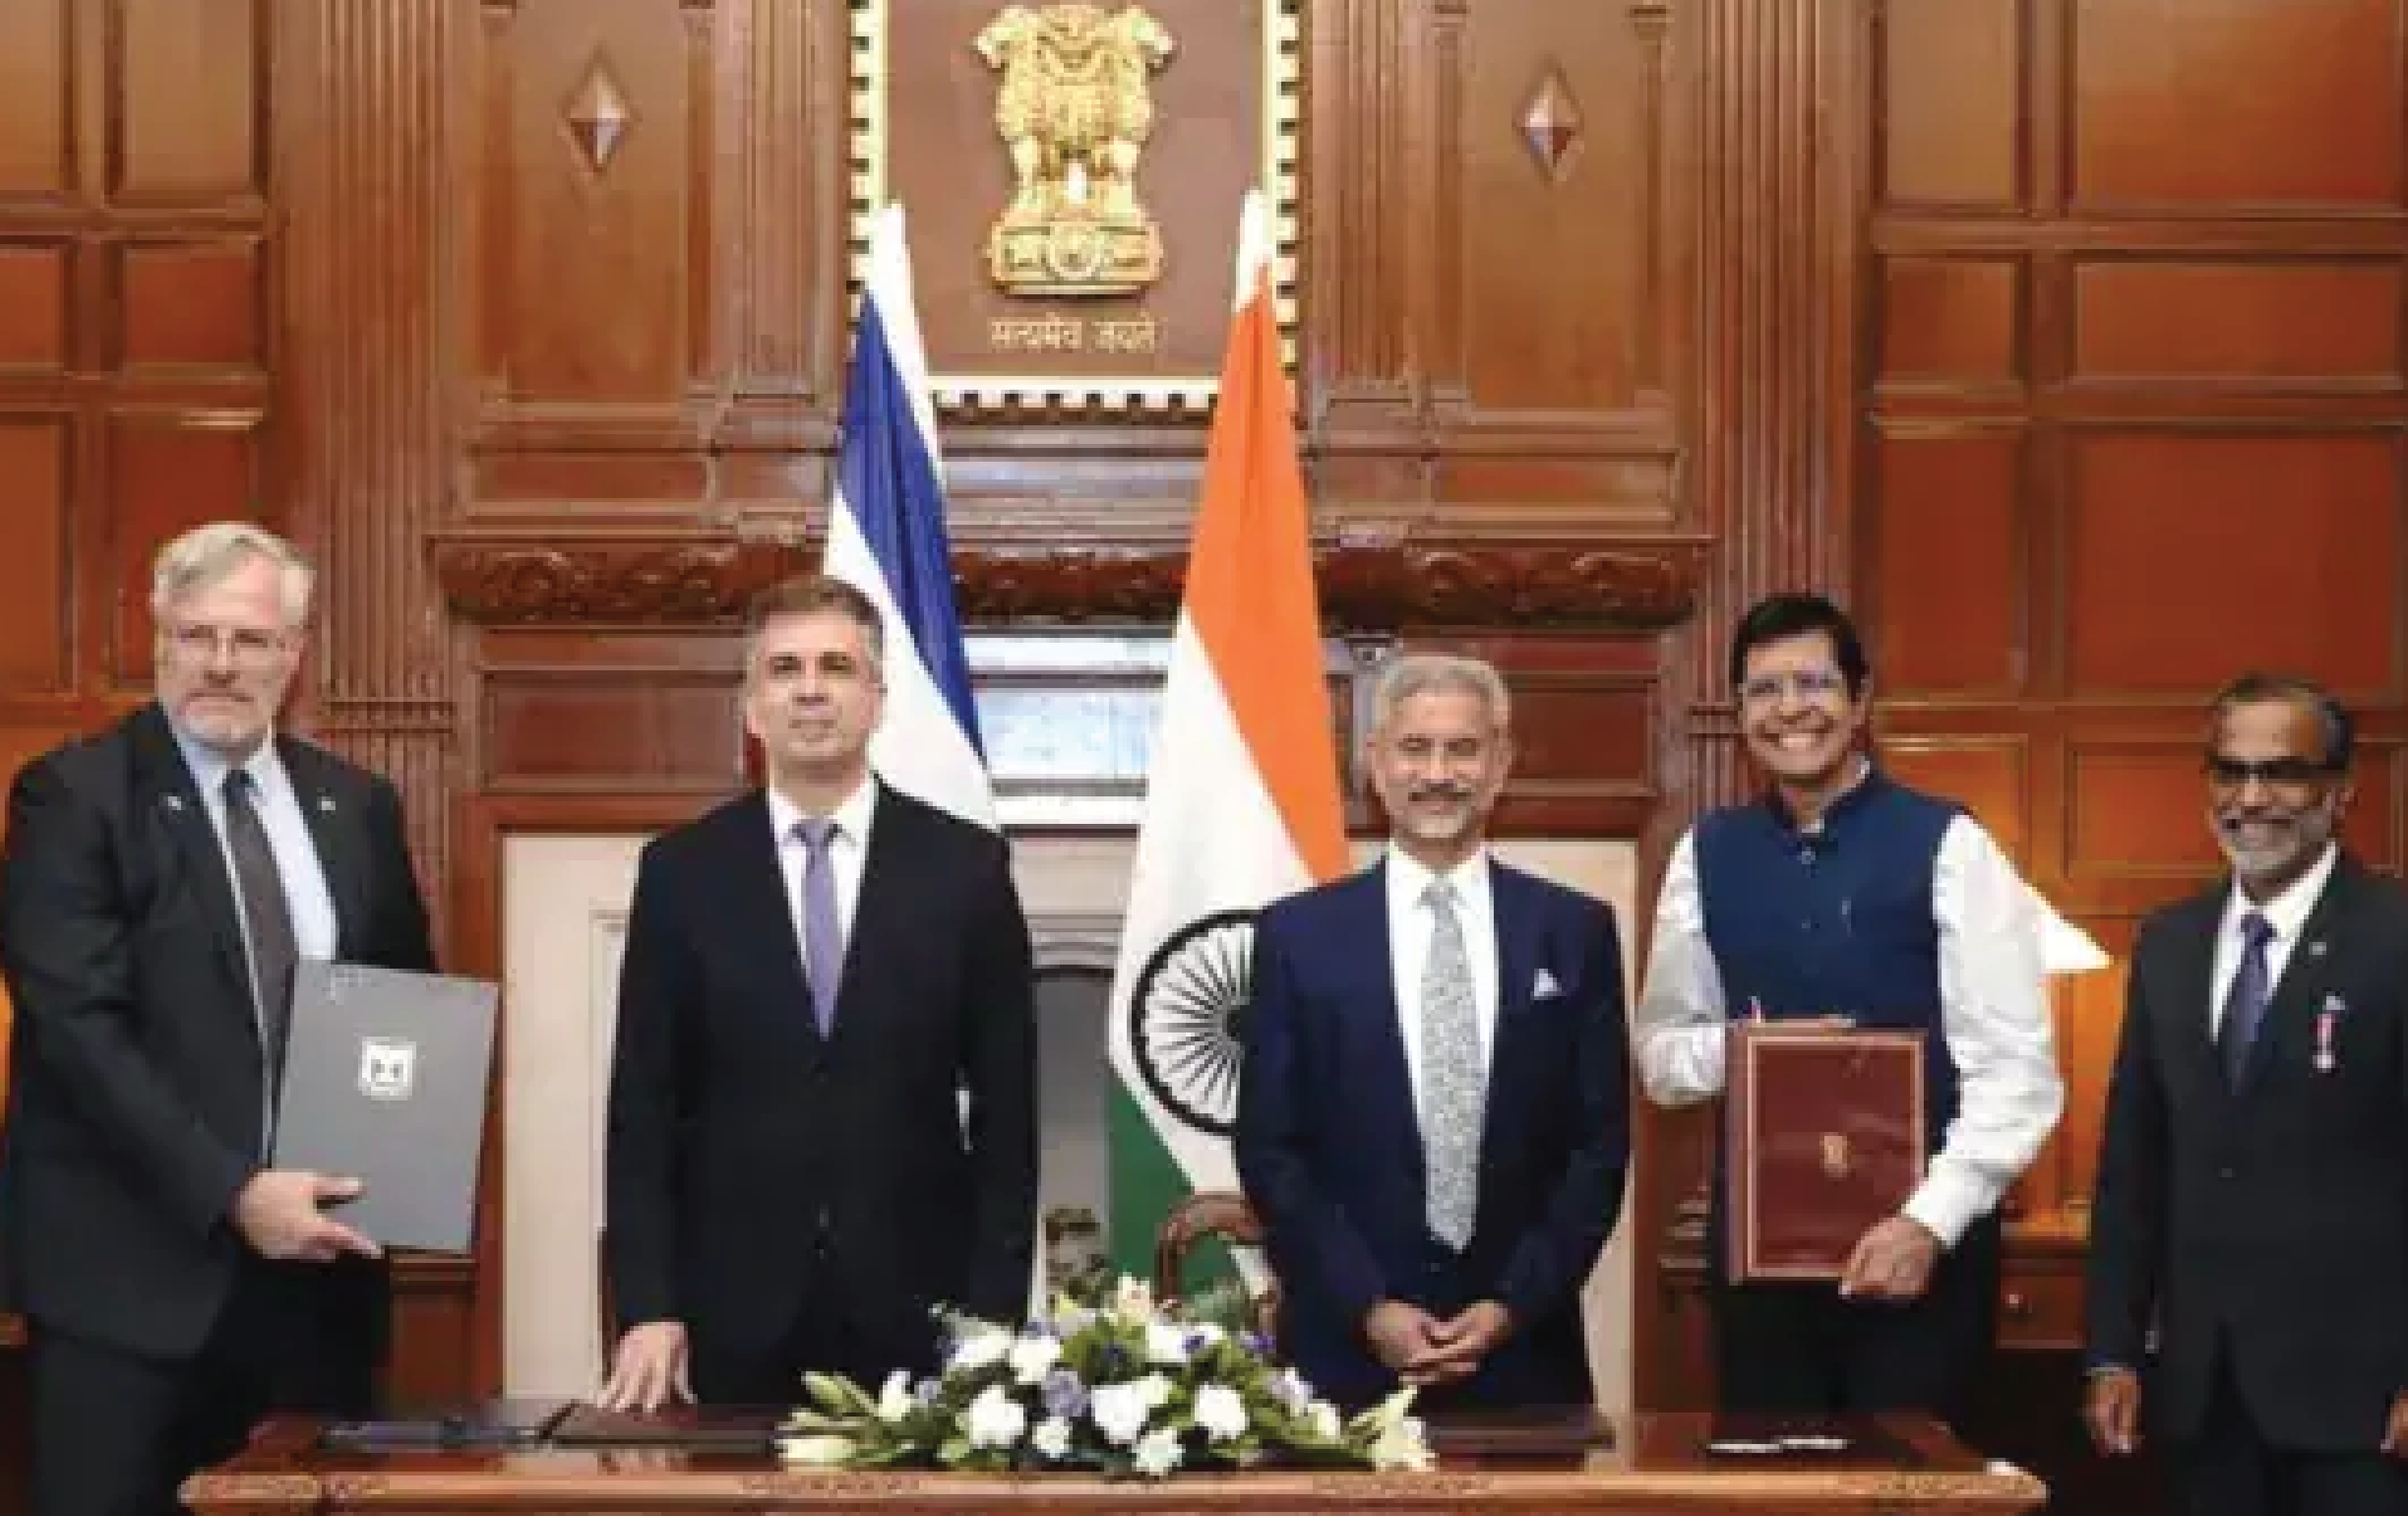 IIT Madras Israel government join hands to establish ‘India – Israel Center of Water Technology